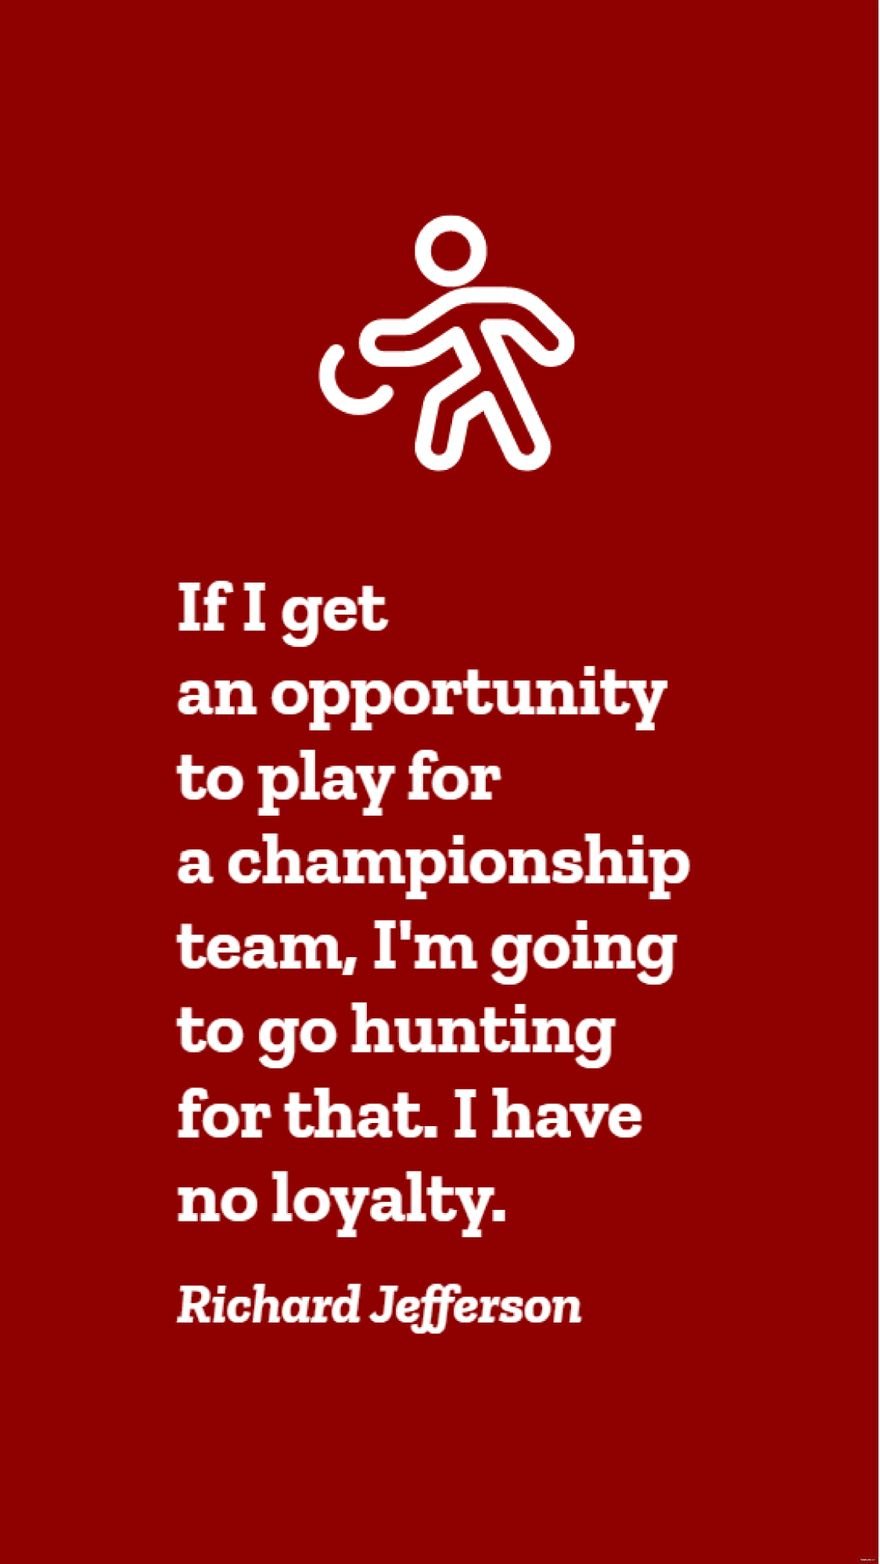 Richard Jefferson - If I get an opportunity to play for a championship team, I'm going to go hunting for that. I have no loyalty.